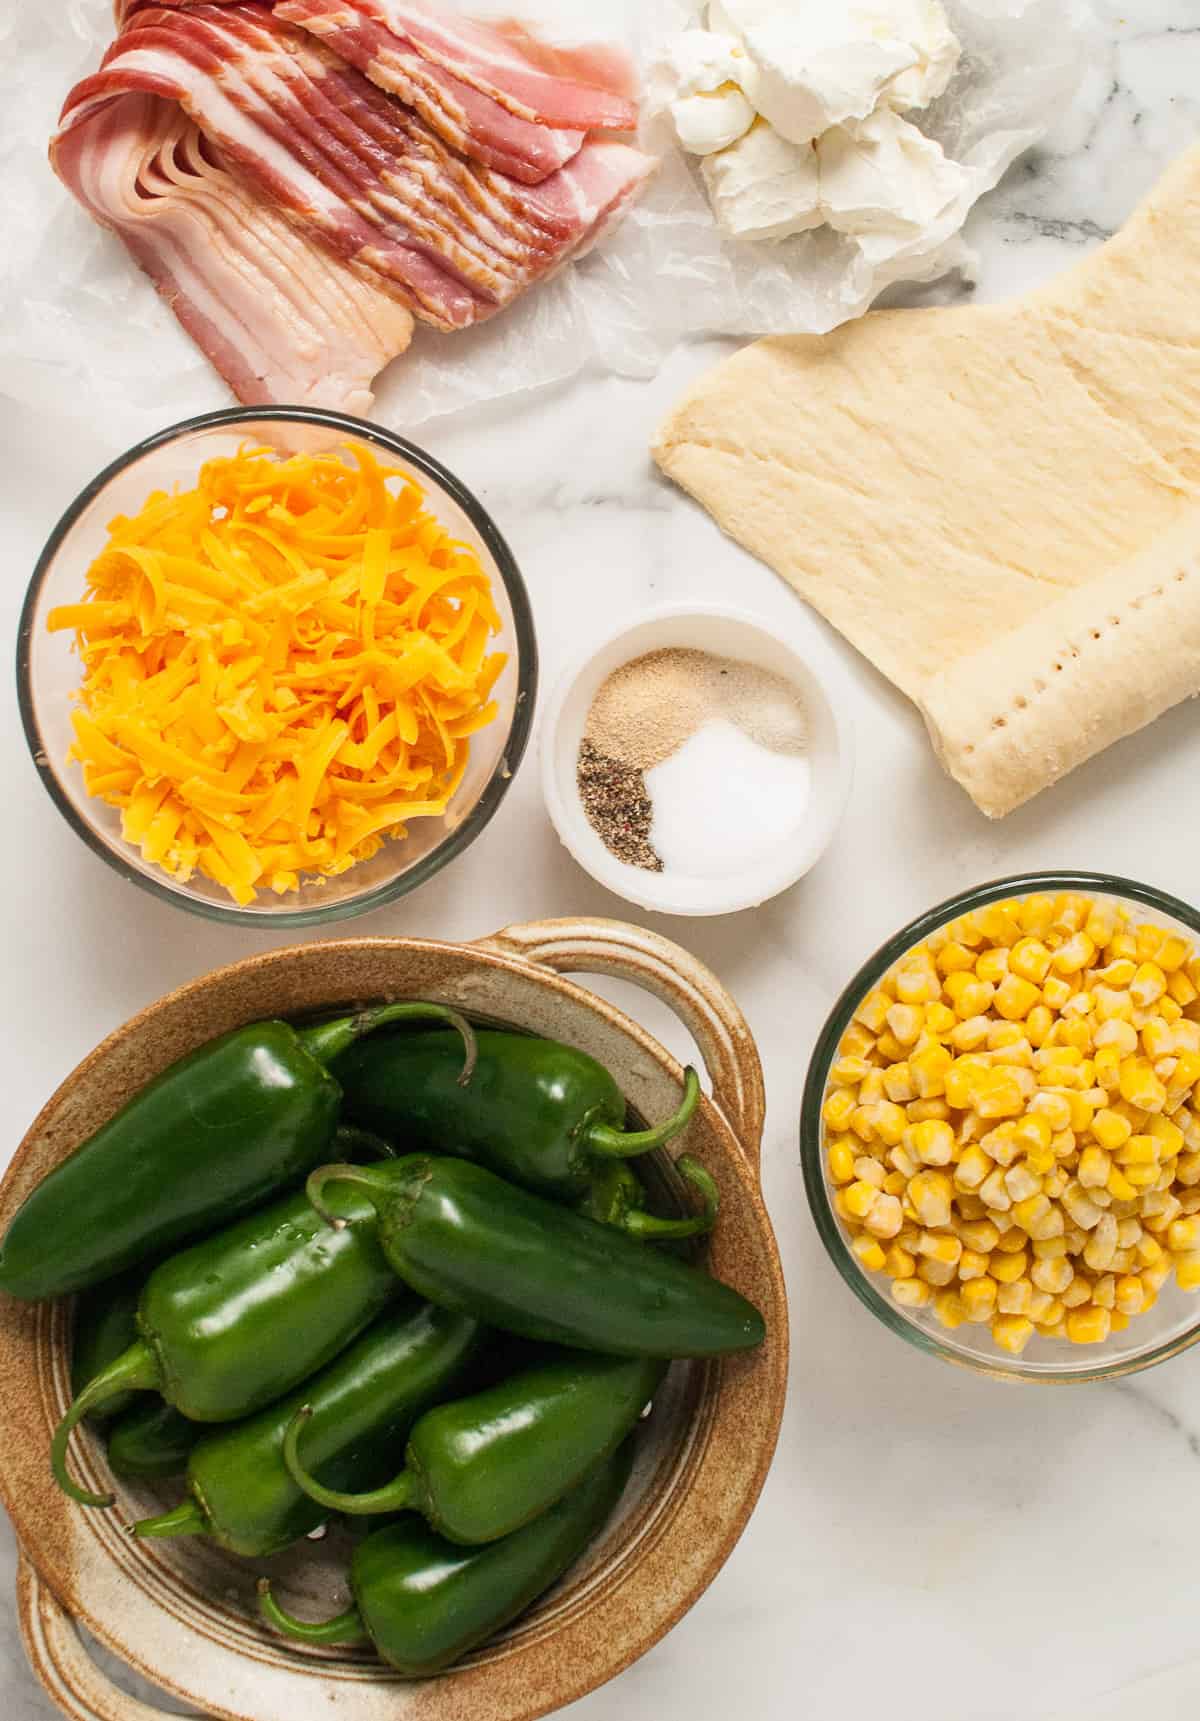 Ingredients for making Halloween jalapeno poppers that look like mummies.